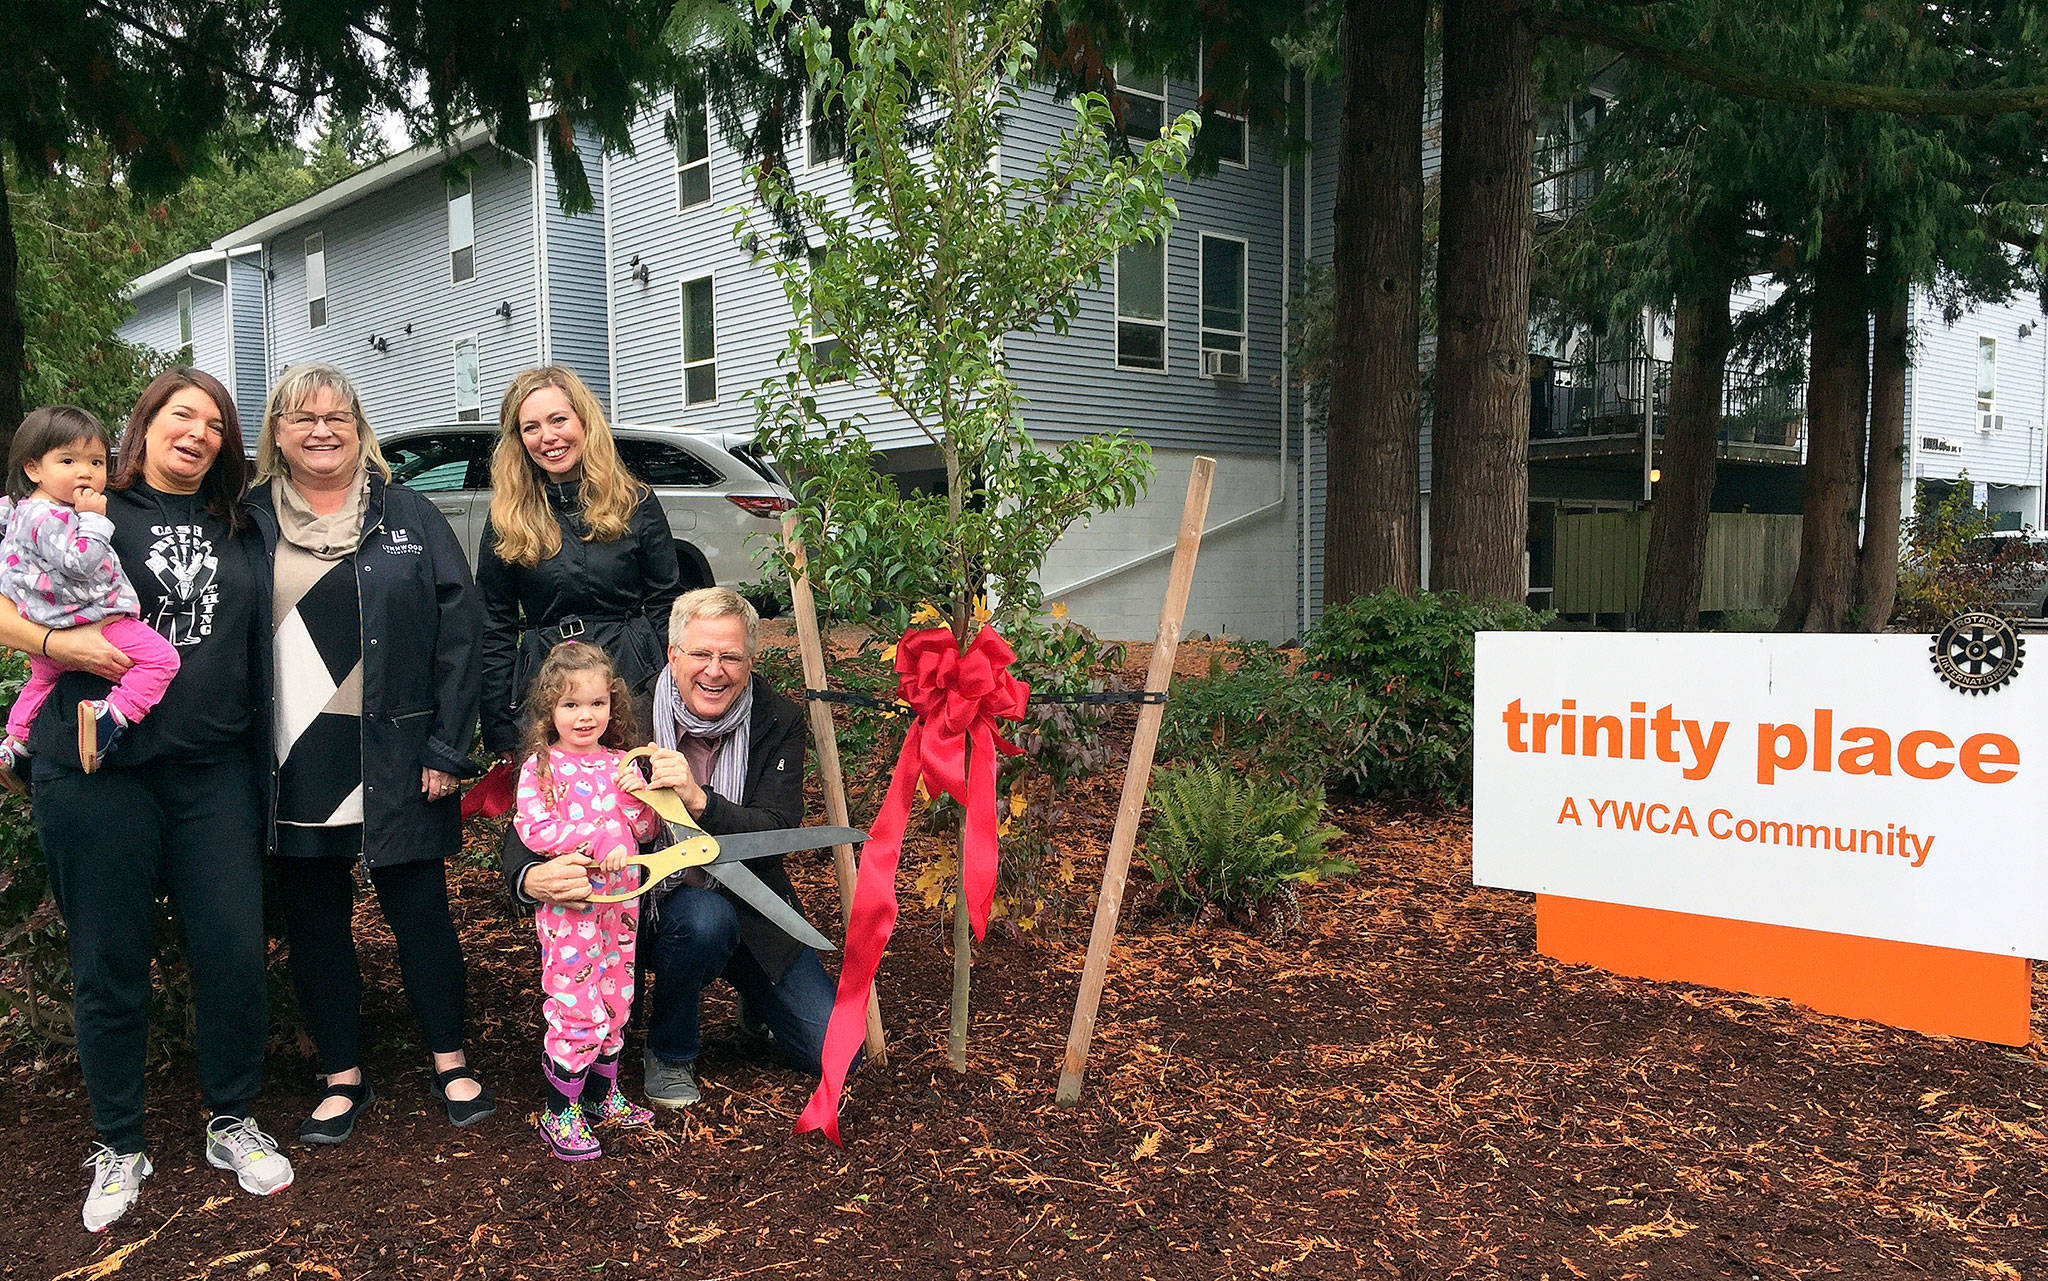 Rick Steves (right) at Trinity Place, the Lynnwood property he donated this year to YWCA Snohomish County. He was joined by (from left) Trinity Place resident Ricanna (holding child), Lynnwood Mayor Nicola Smith and YWCA Executive Director Mary Anne Dillon. (Contributed photo)